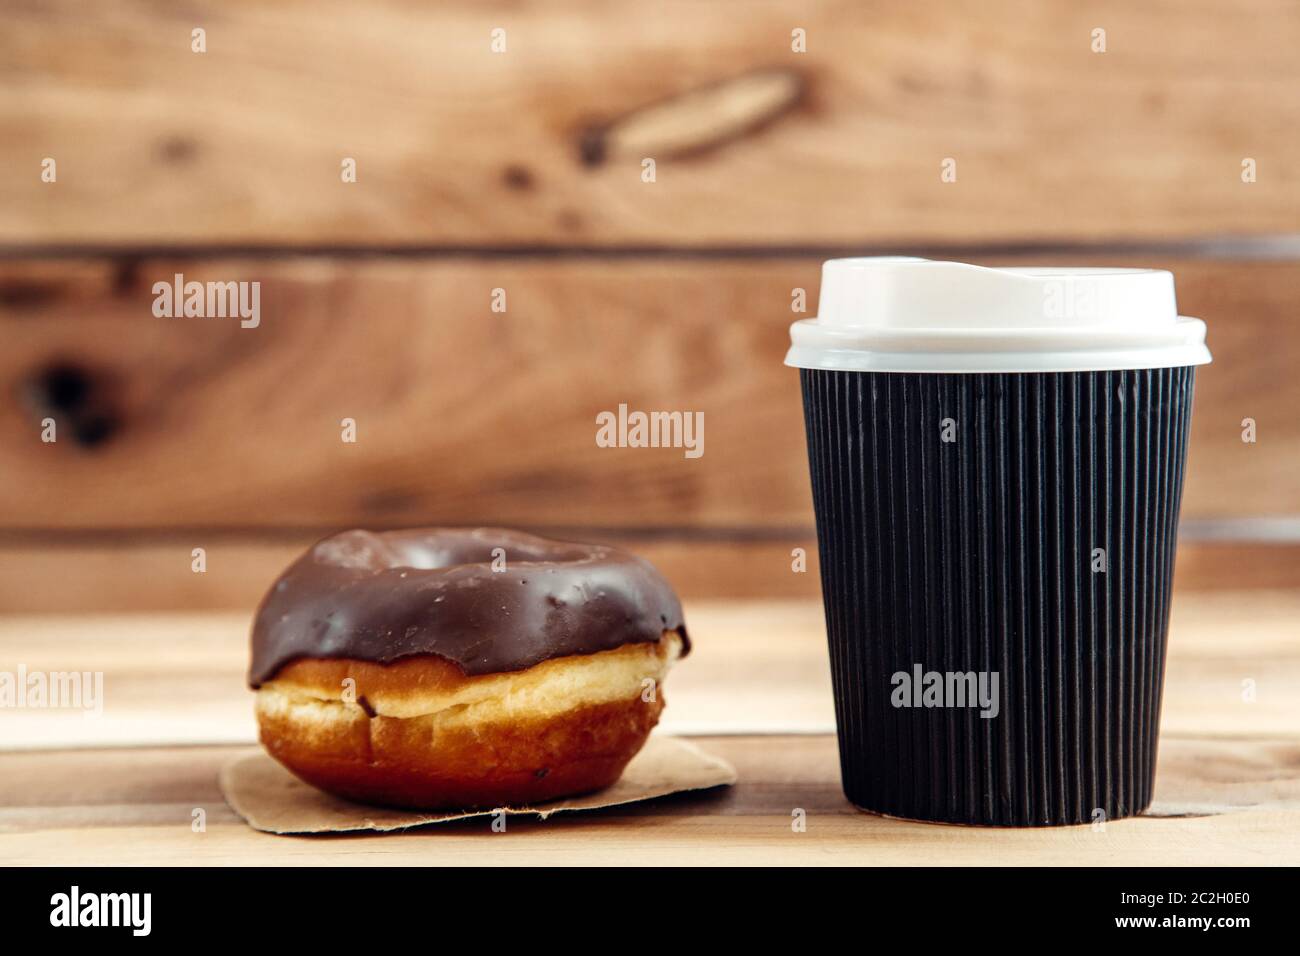 fresh artisan donut and take away coffee, wooden background with copy space Stock Photo